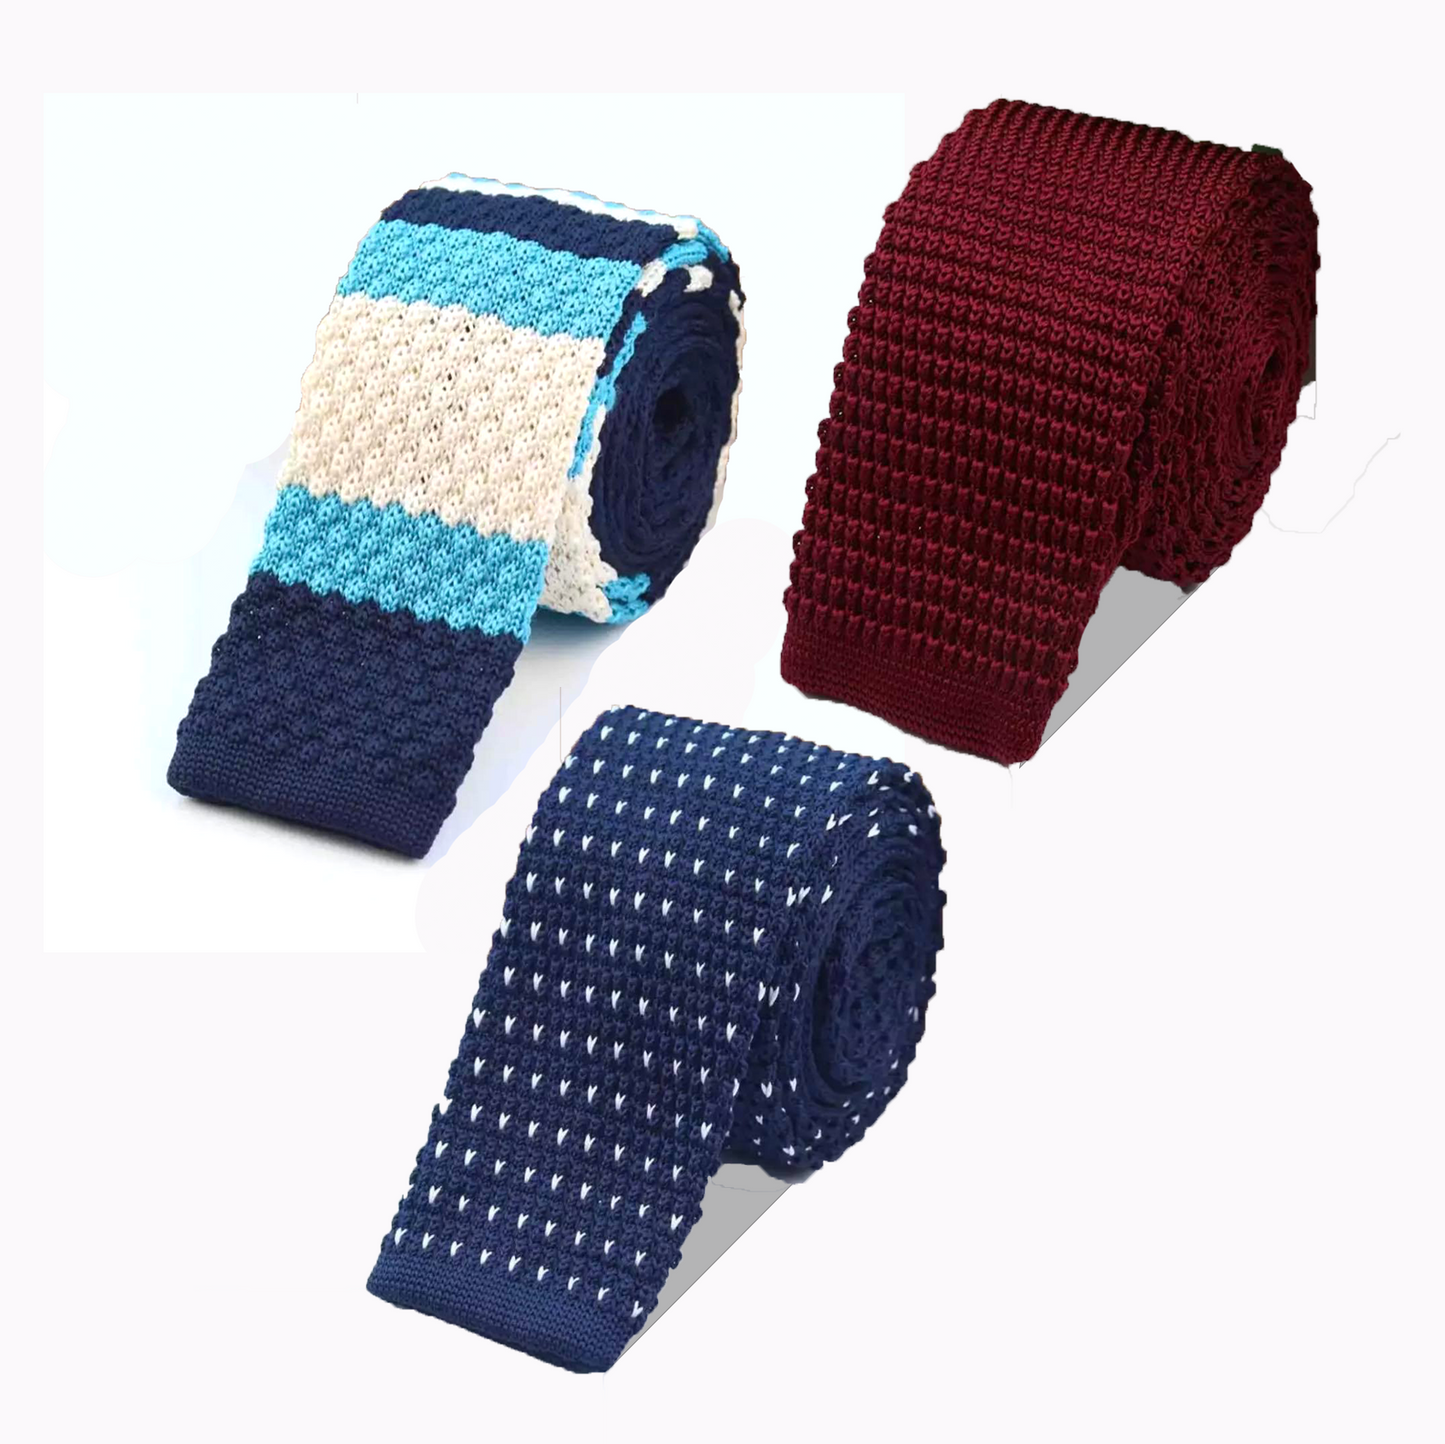 The Monthly Tie Club | Three Knitted Tie Subscription | Luxury tie subscriptions